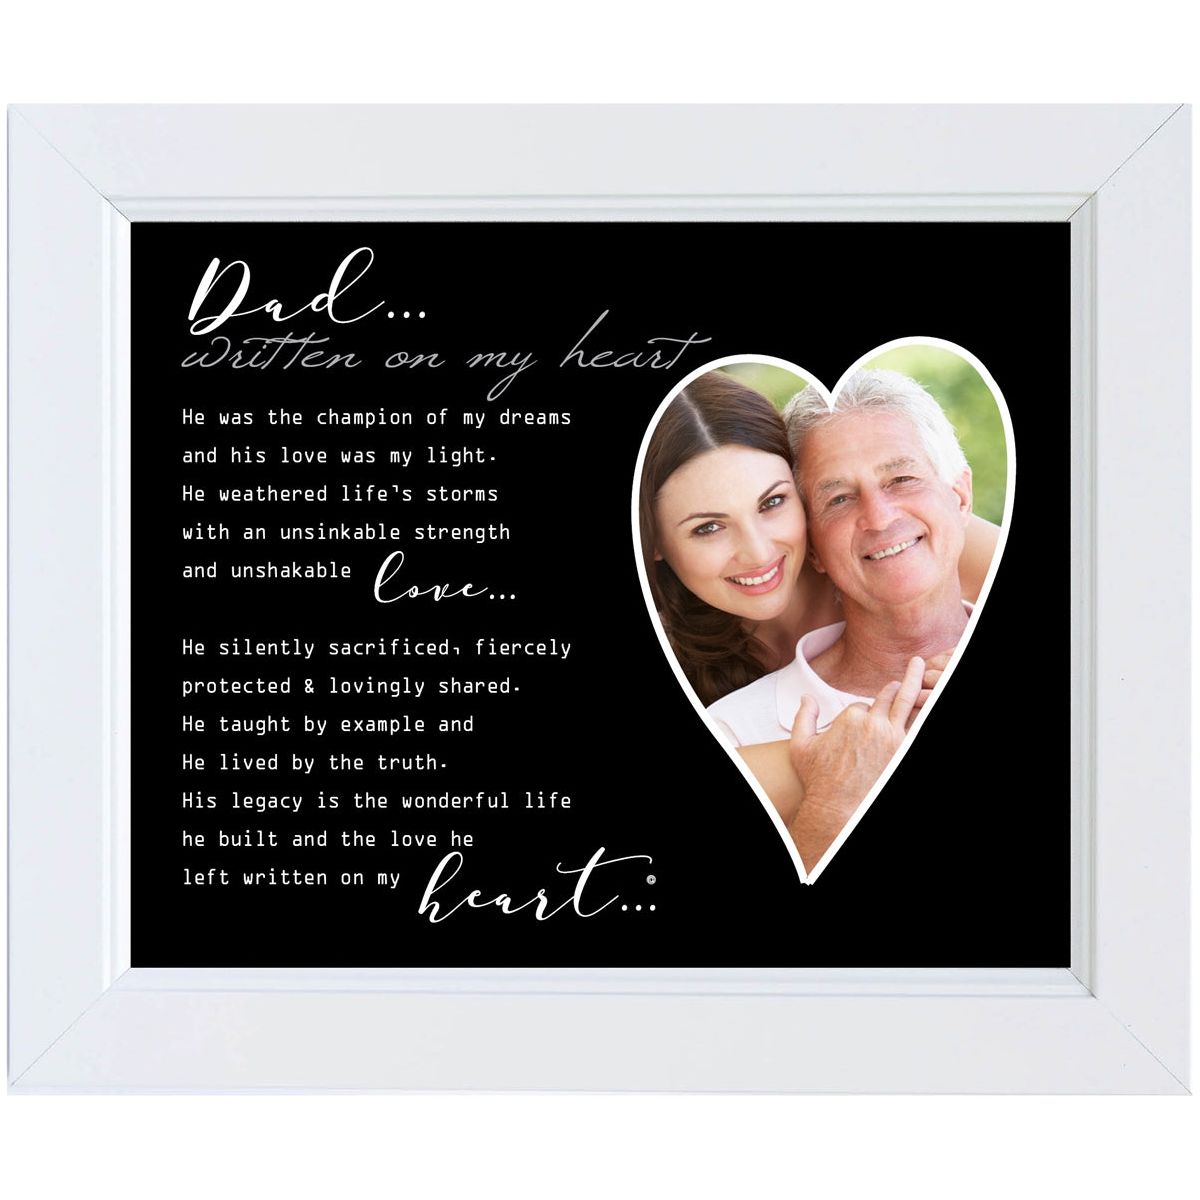 8x10 white frame with &quot;Dad... Written on My Heart&quot; poem and a heart shaped opening for a photograph.